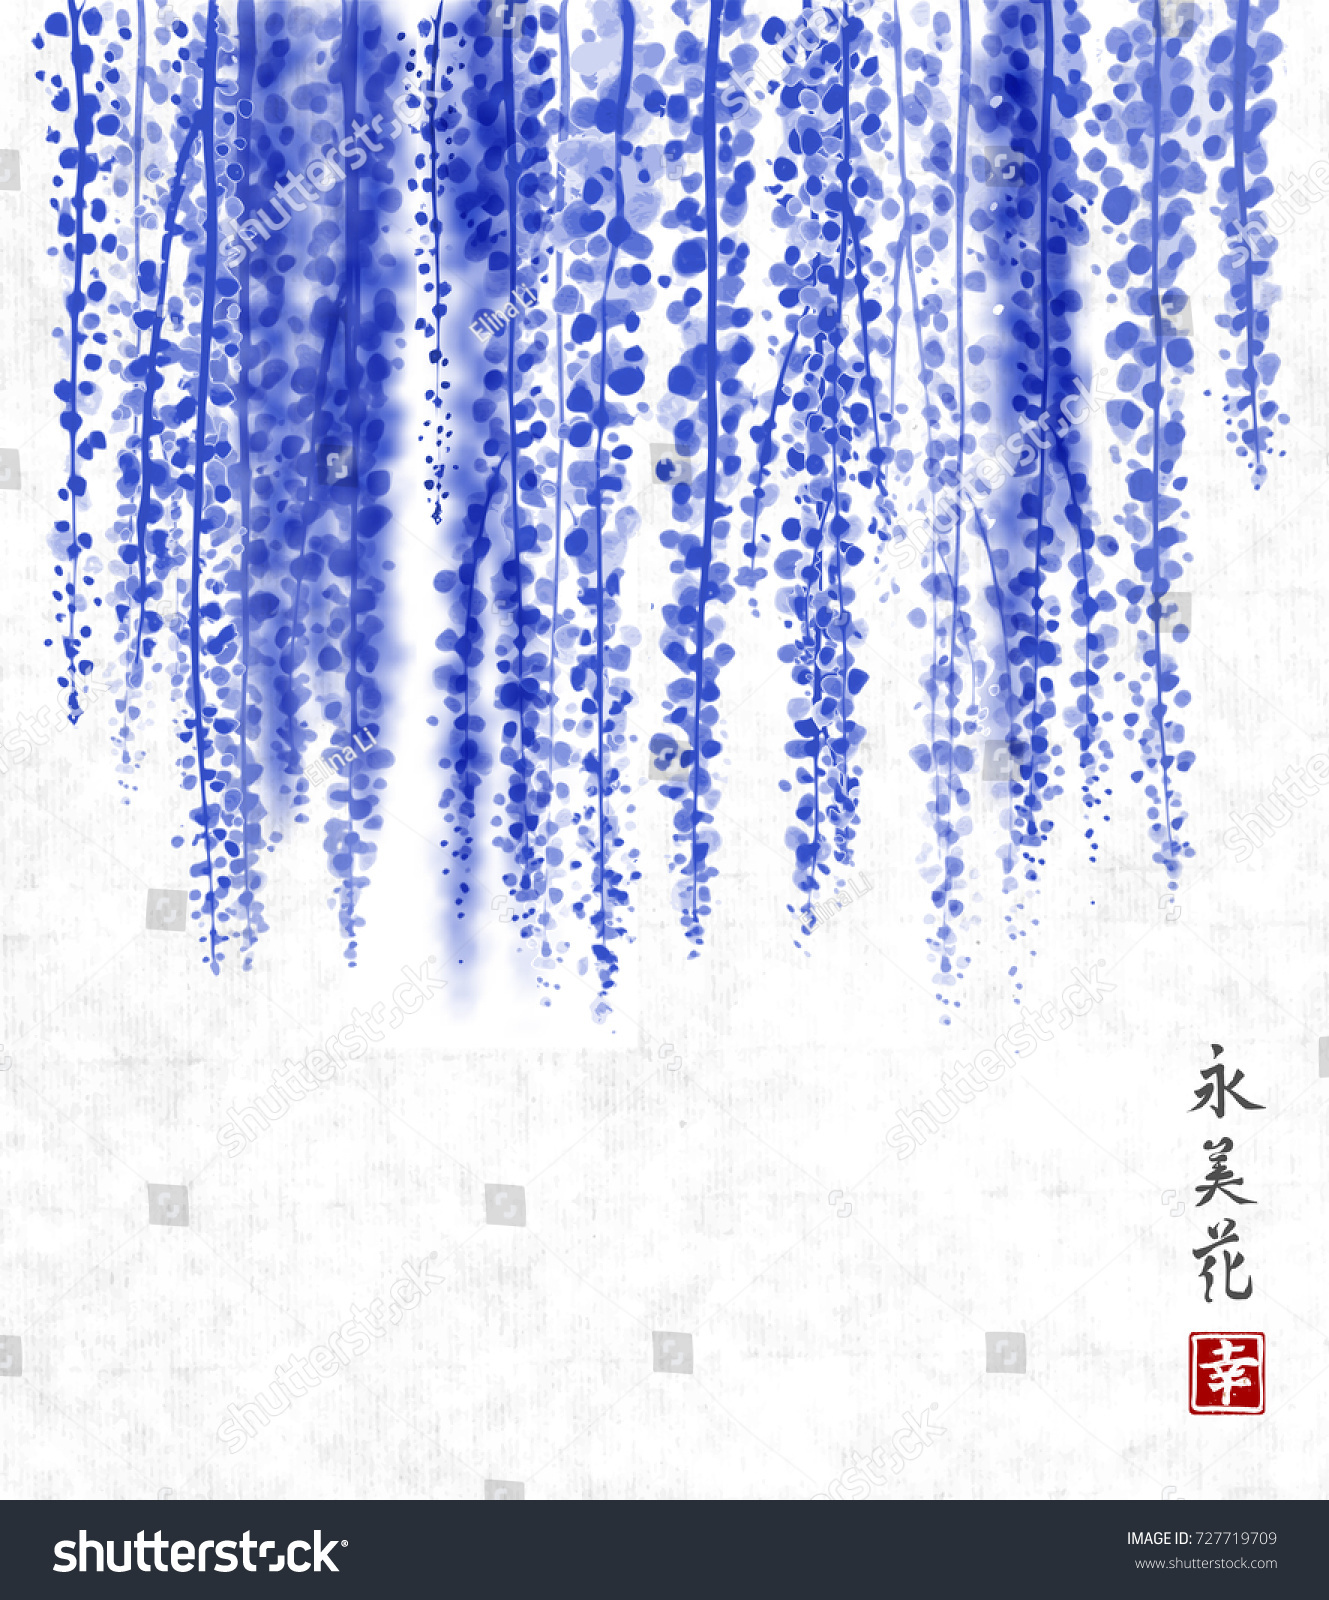 SVG of Wisteria hand drawn with ink on rice paper background. Contains hieroglyph - happiness, eternity, beauty, flower. Traditional oriental ink painting sumi-e, u-sin, go-hua. Bunches of flowers. svg